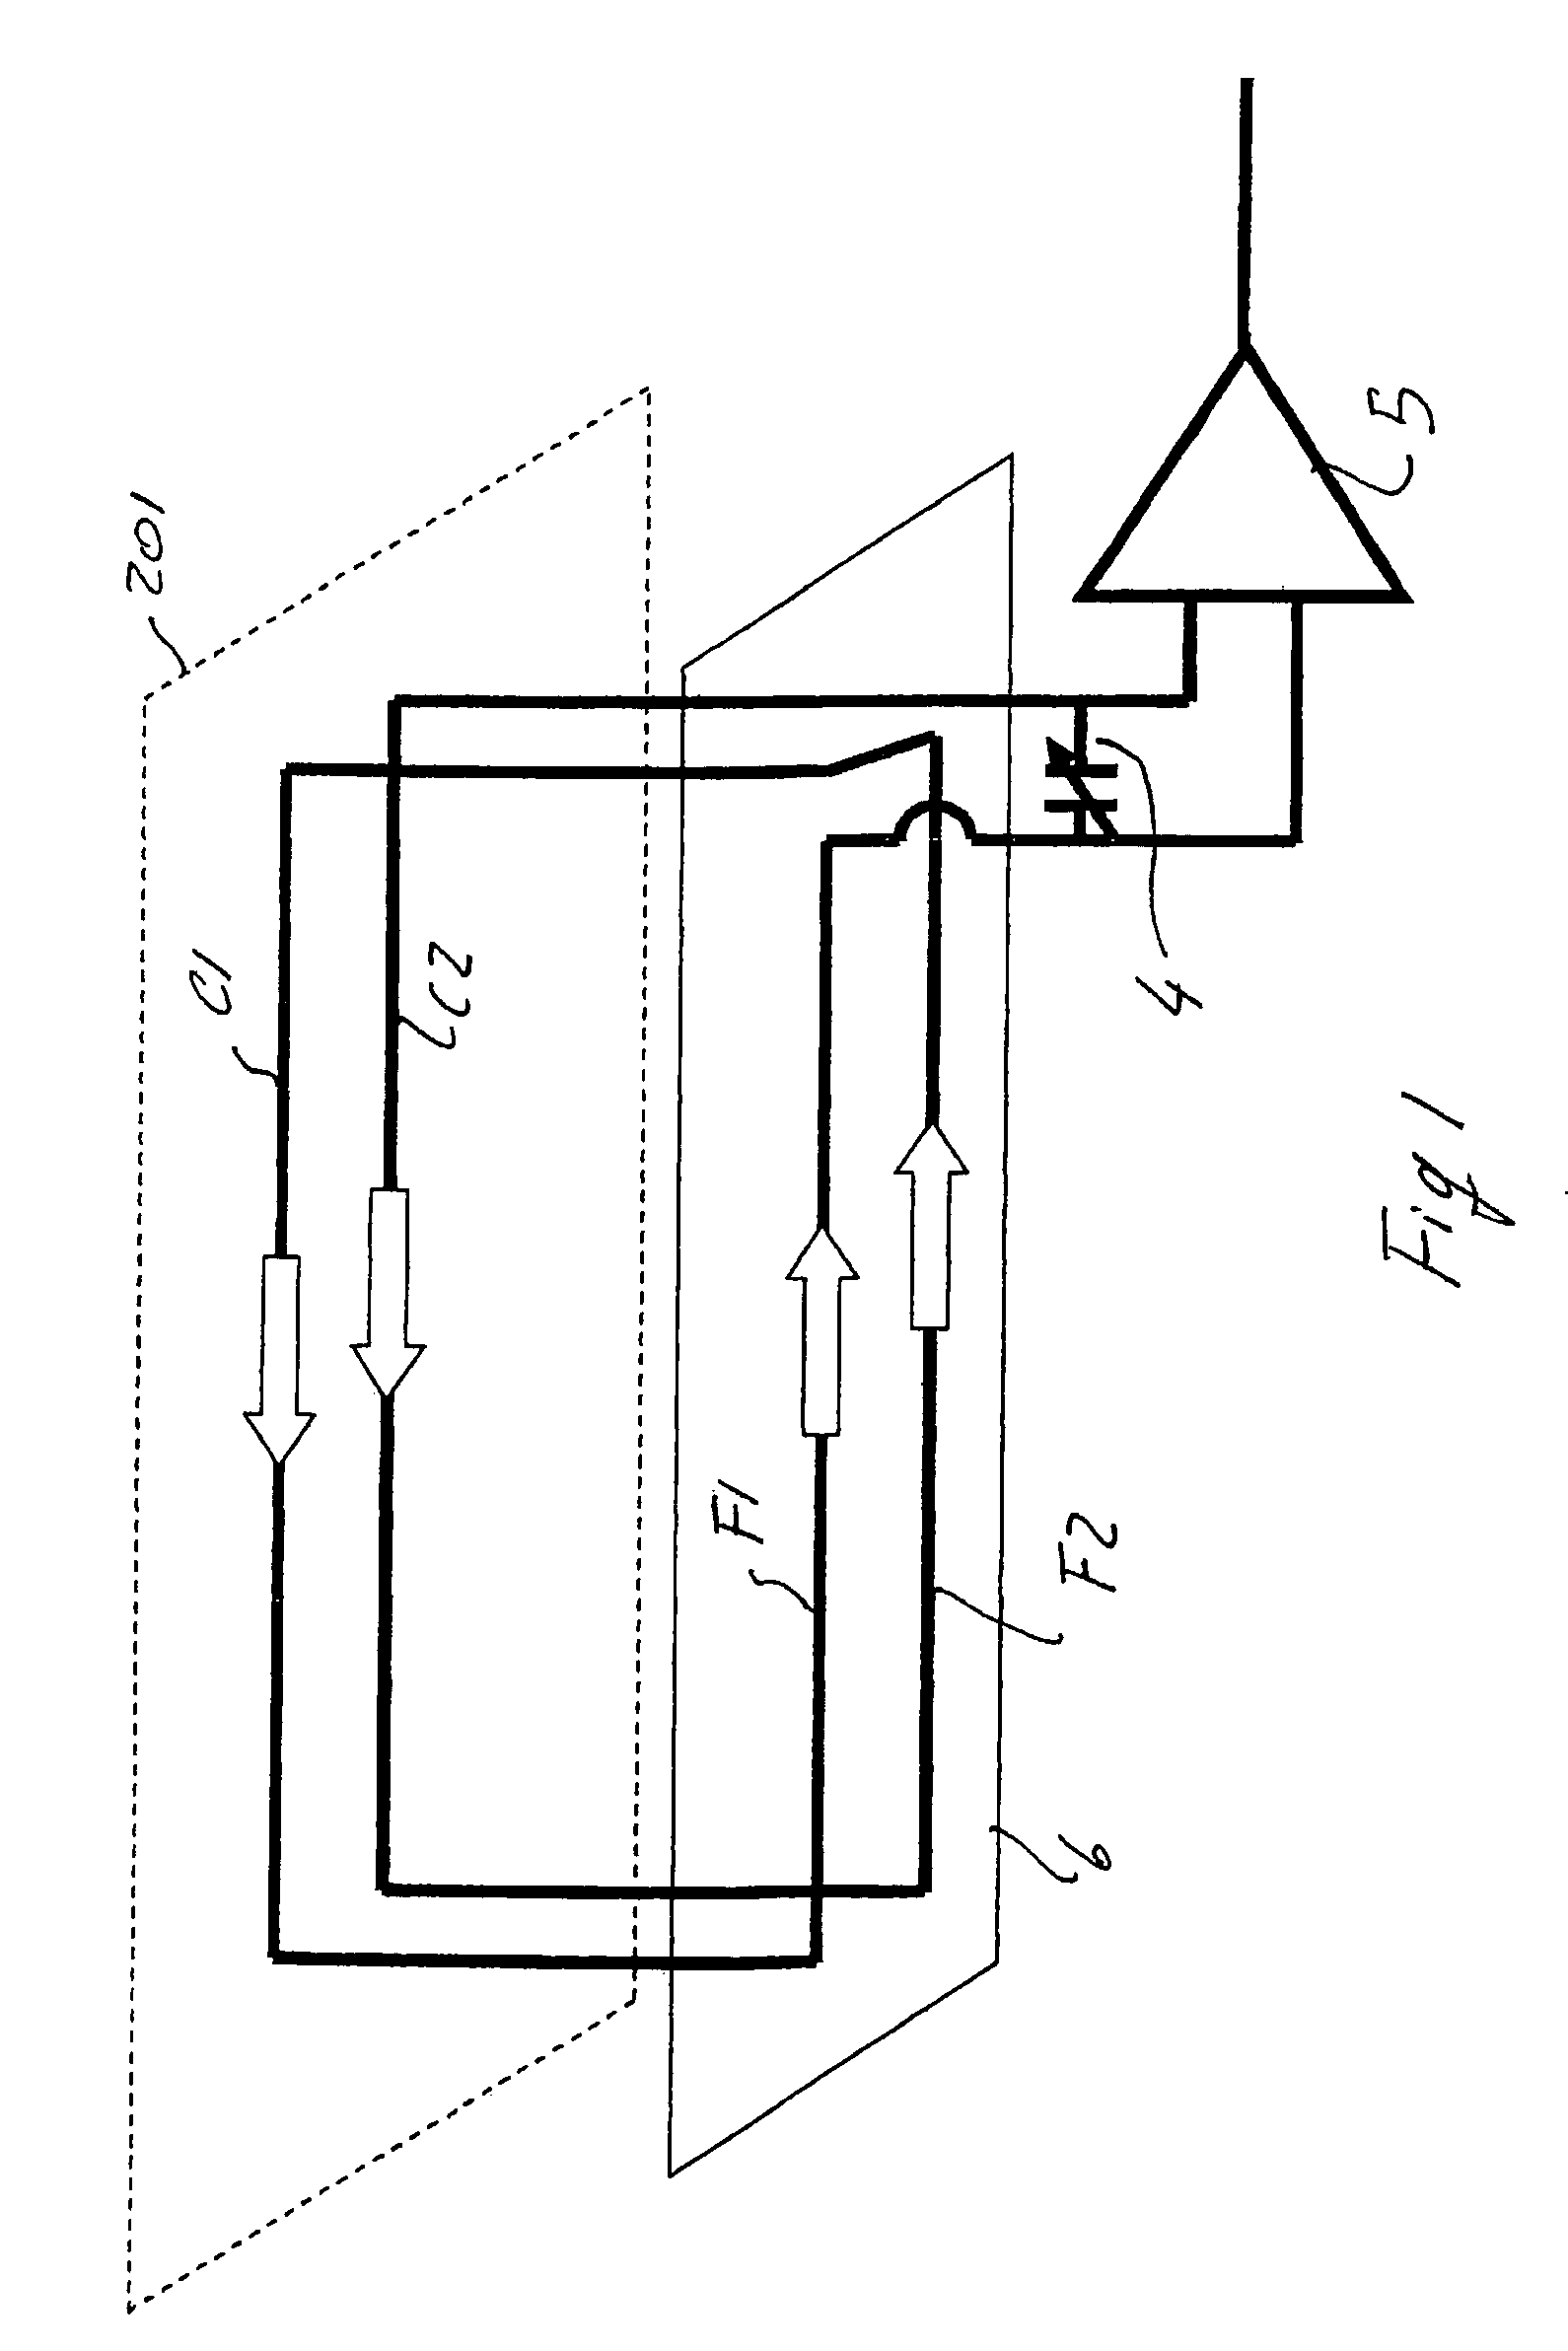 Receiving coil for nuclear magnetic resonance imaging apparatus for spinal column images